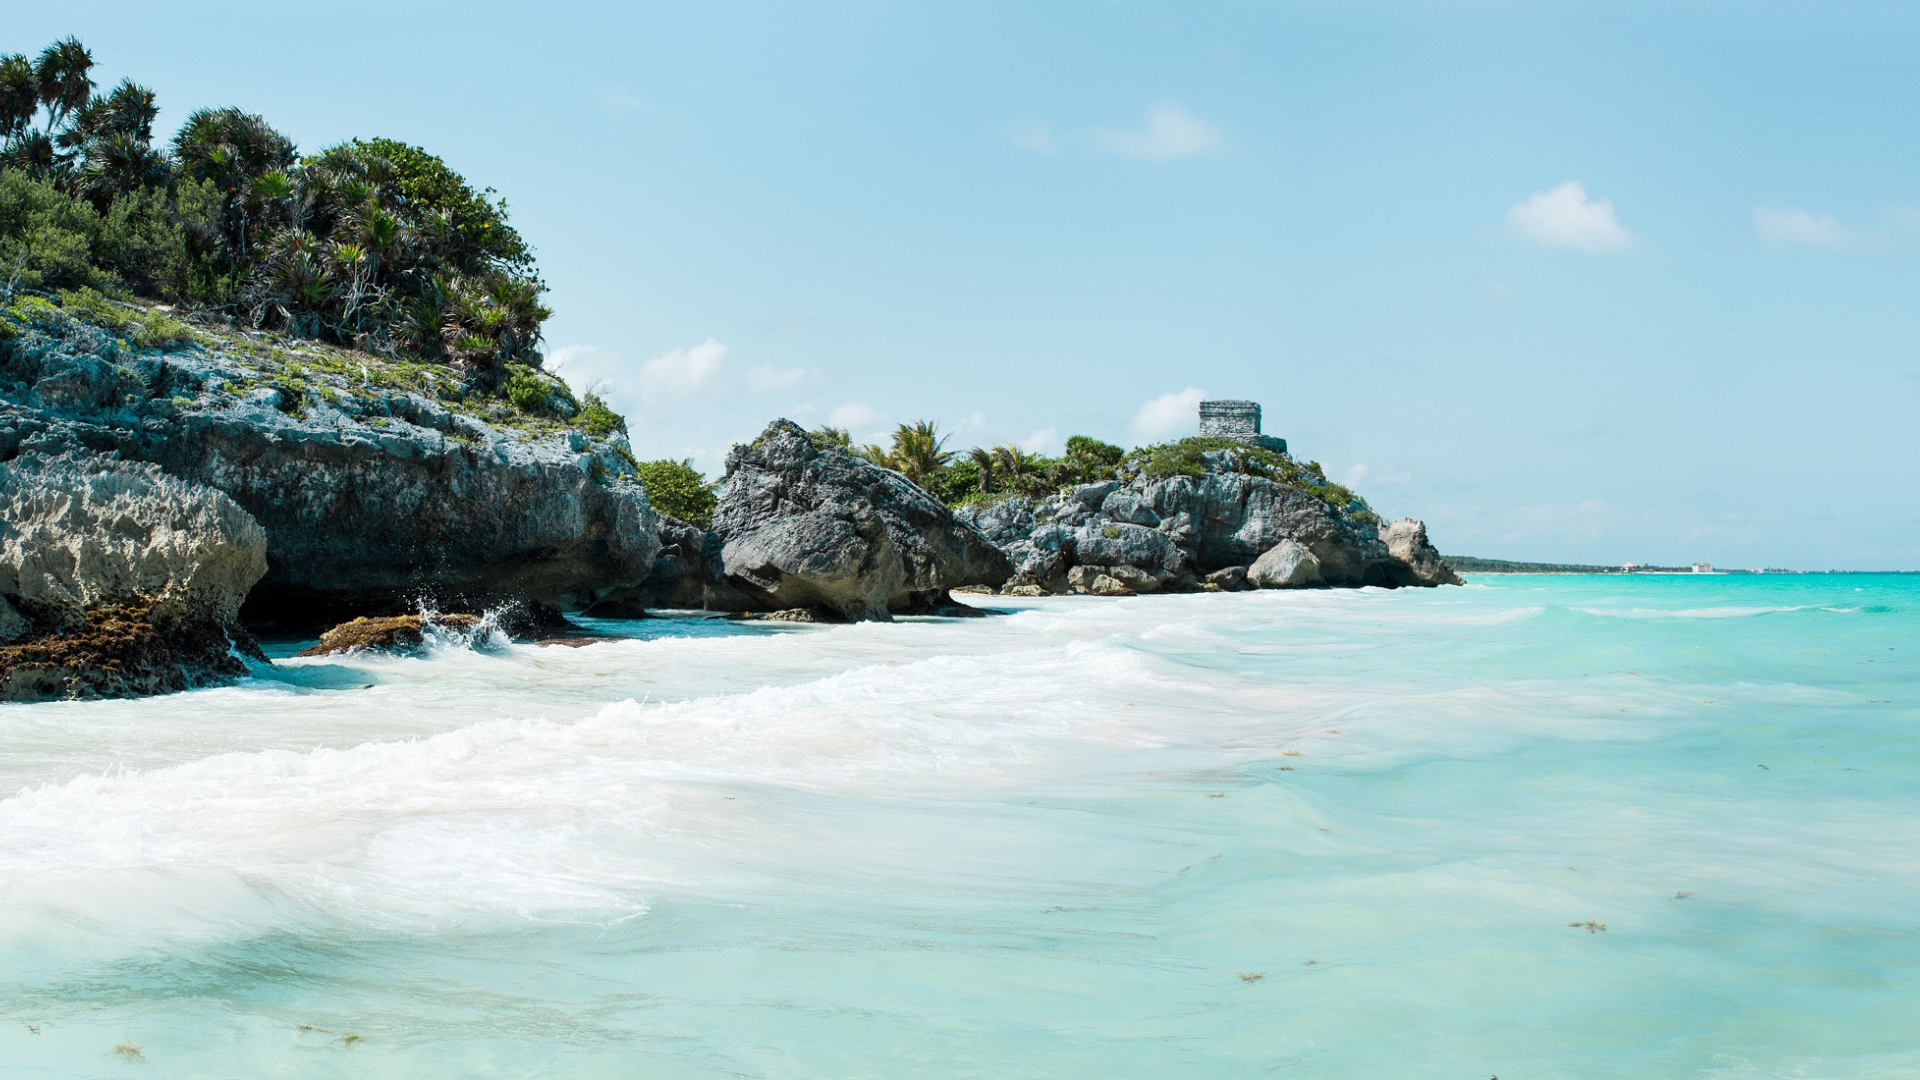 Have you escaped to the beaches of Tulum, Mexico?